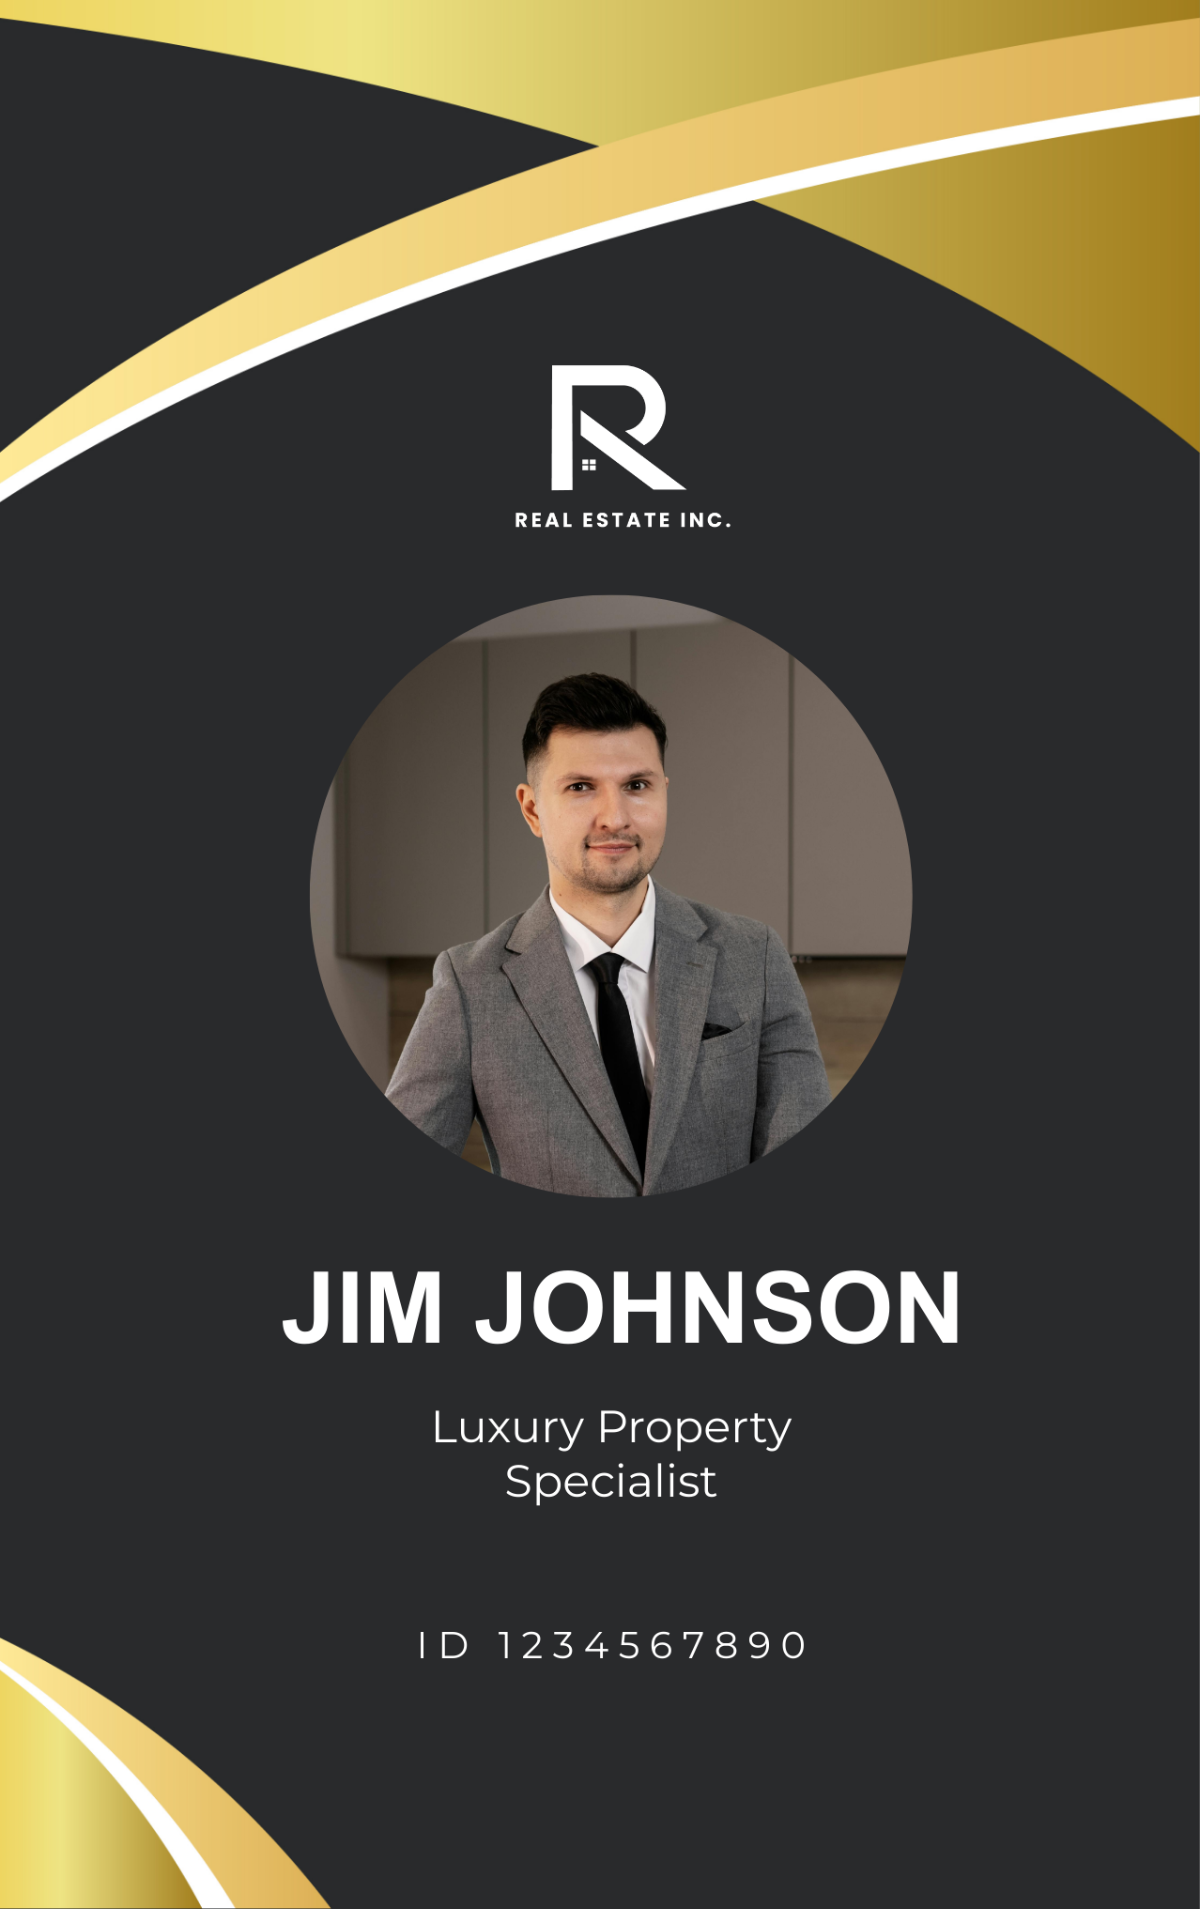 Free Luxury Property Specialist ID Card Template